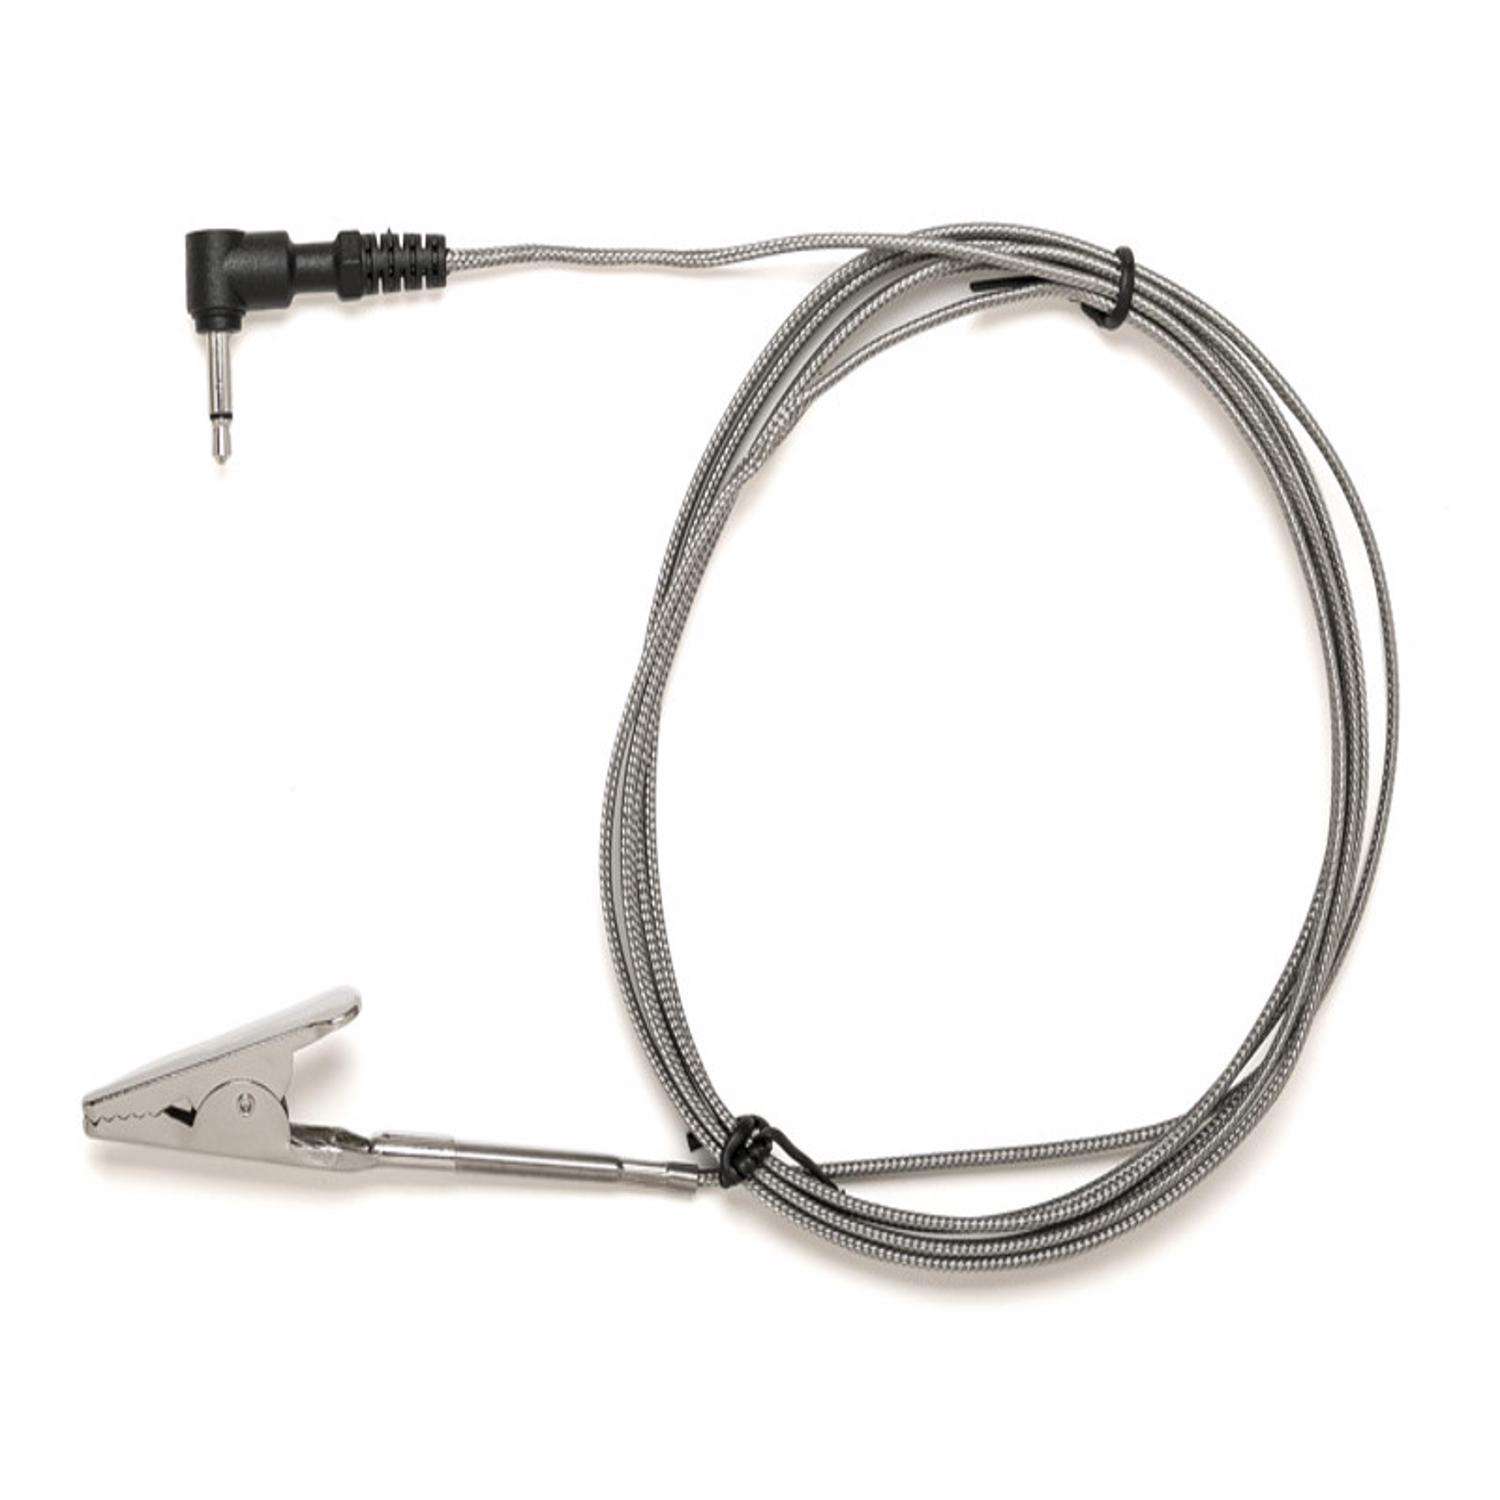 Flame Boss Pit Probe - Ace Hardware